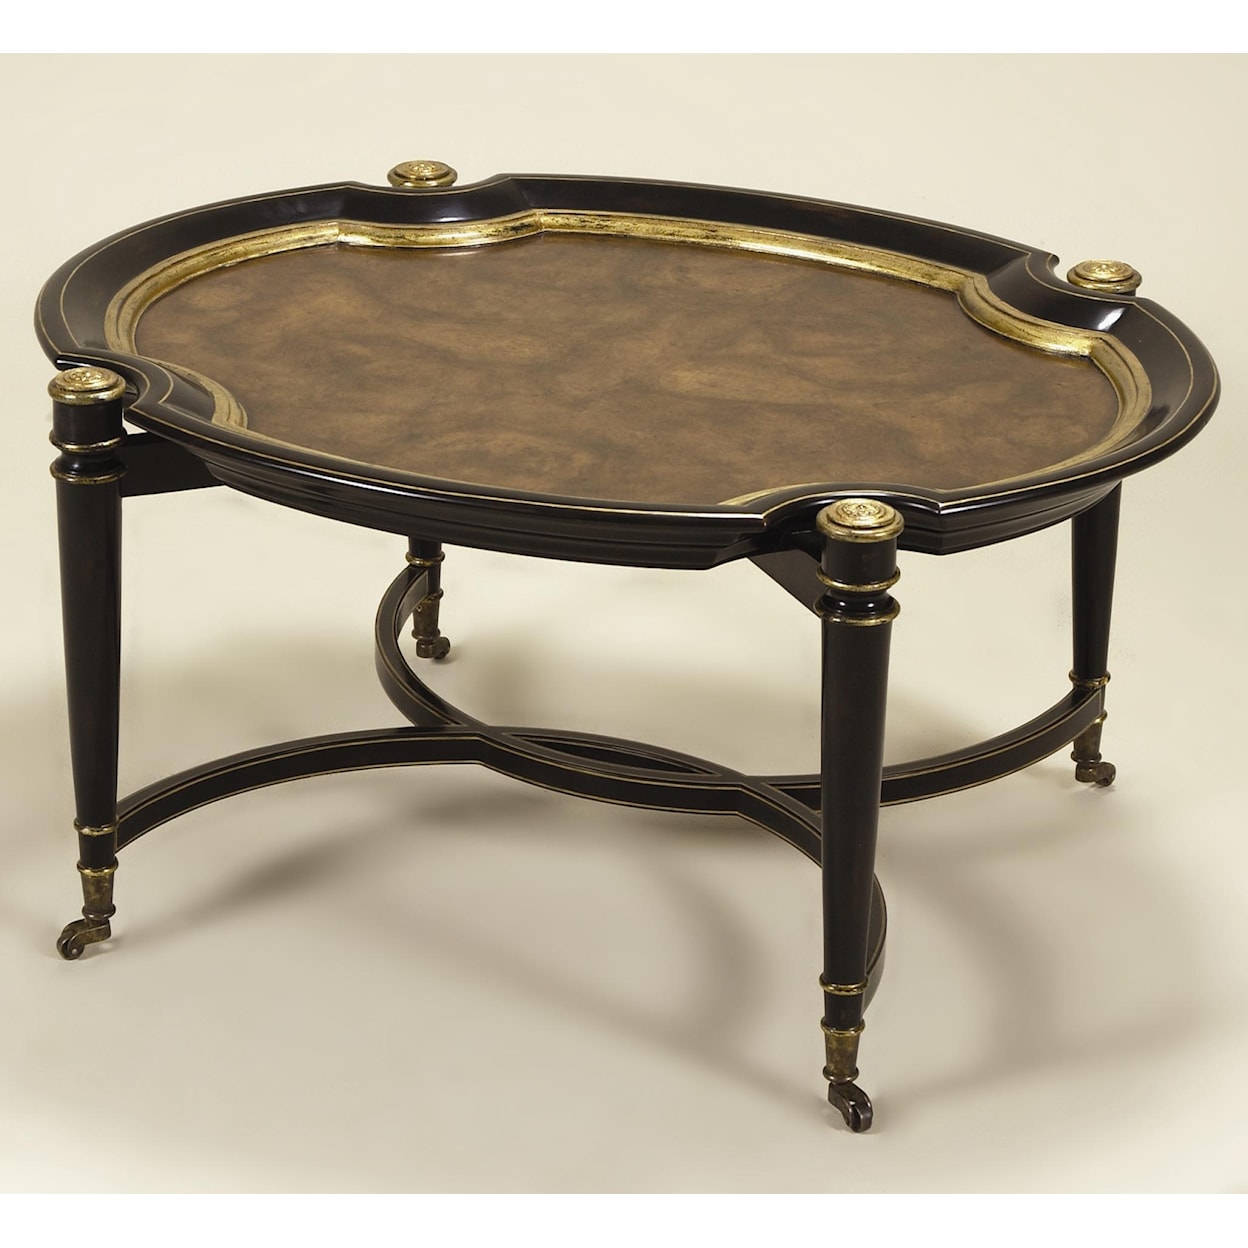 Maitland-Smith Cocktail Tables Hand Painted Black and Gold Cocktail Table